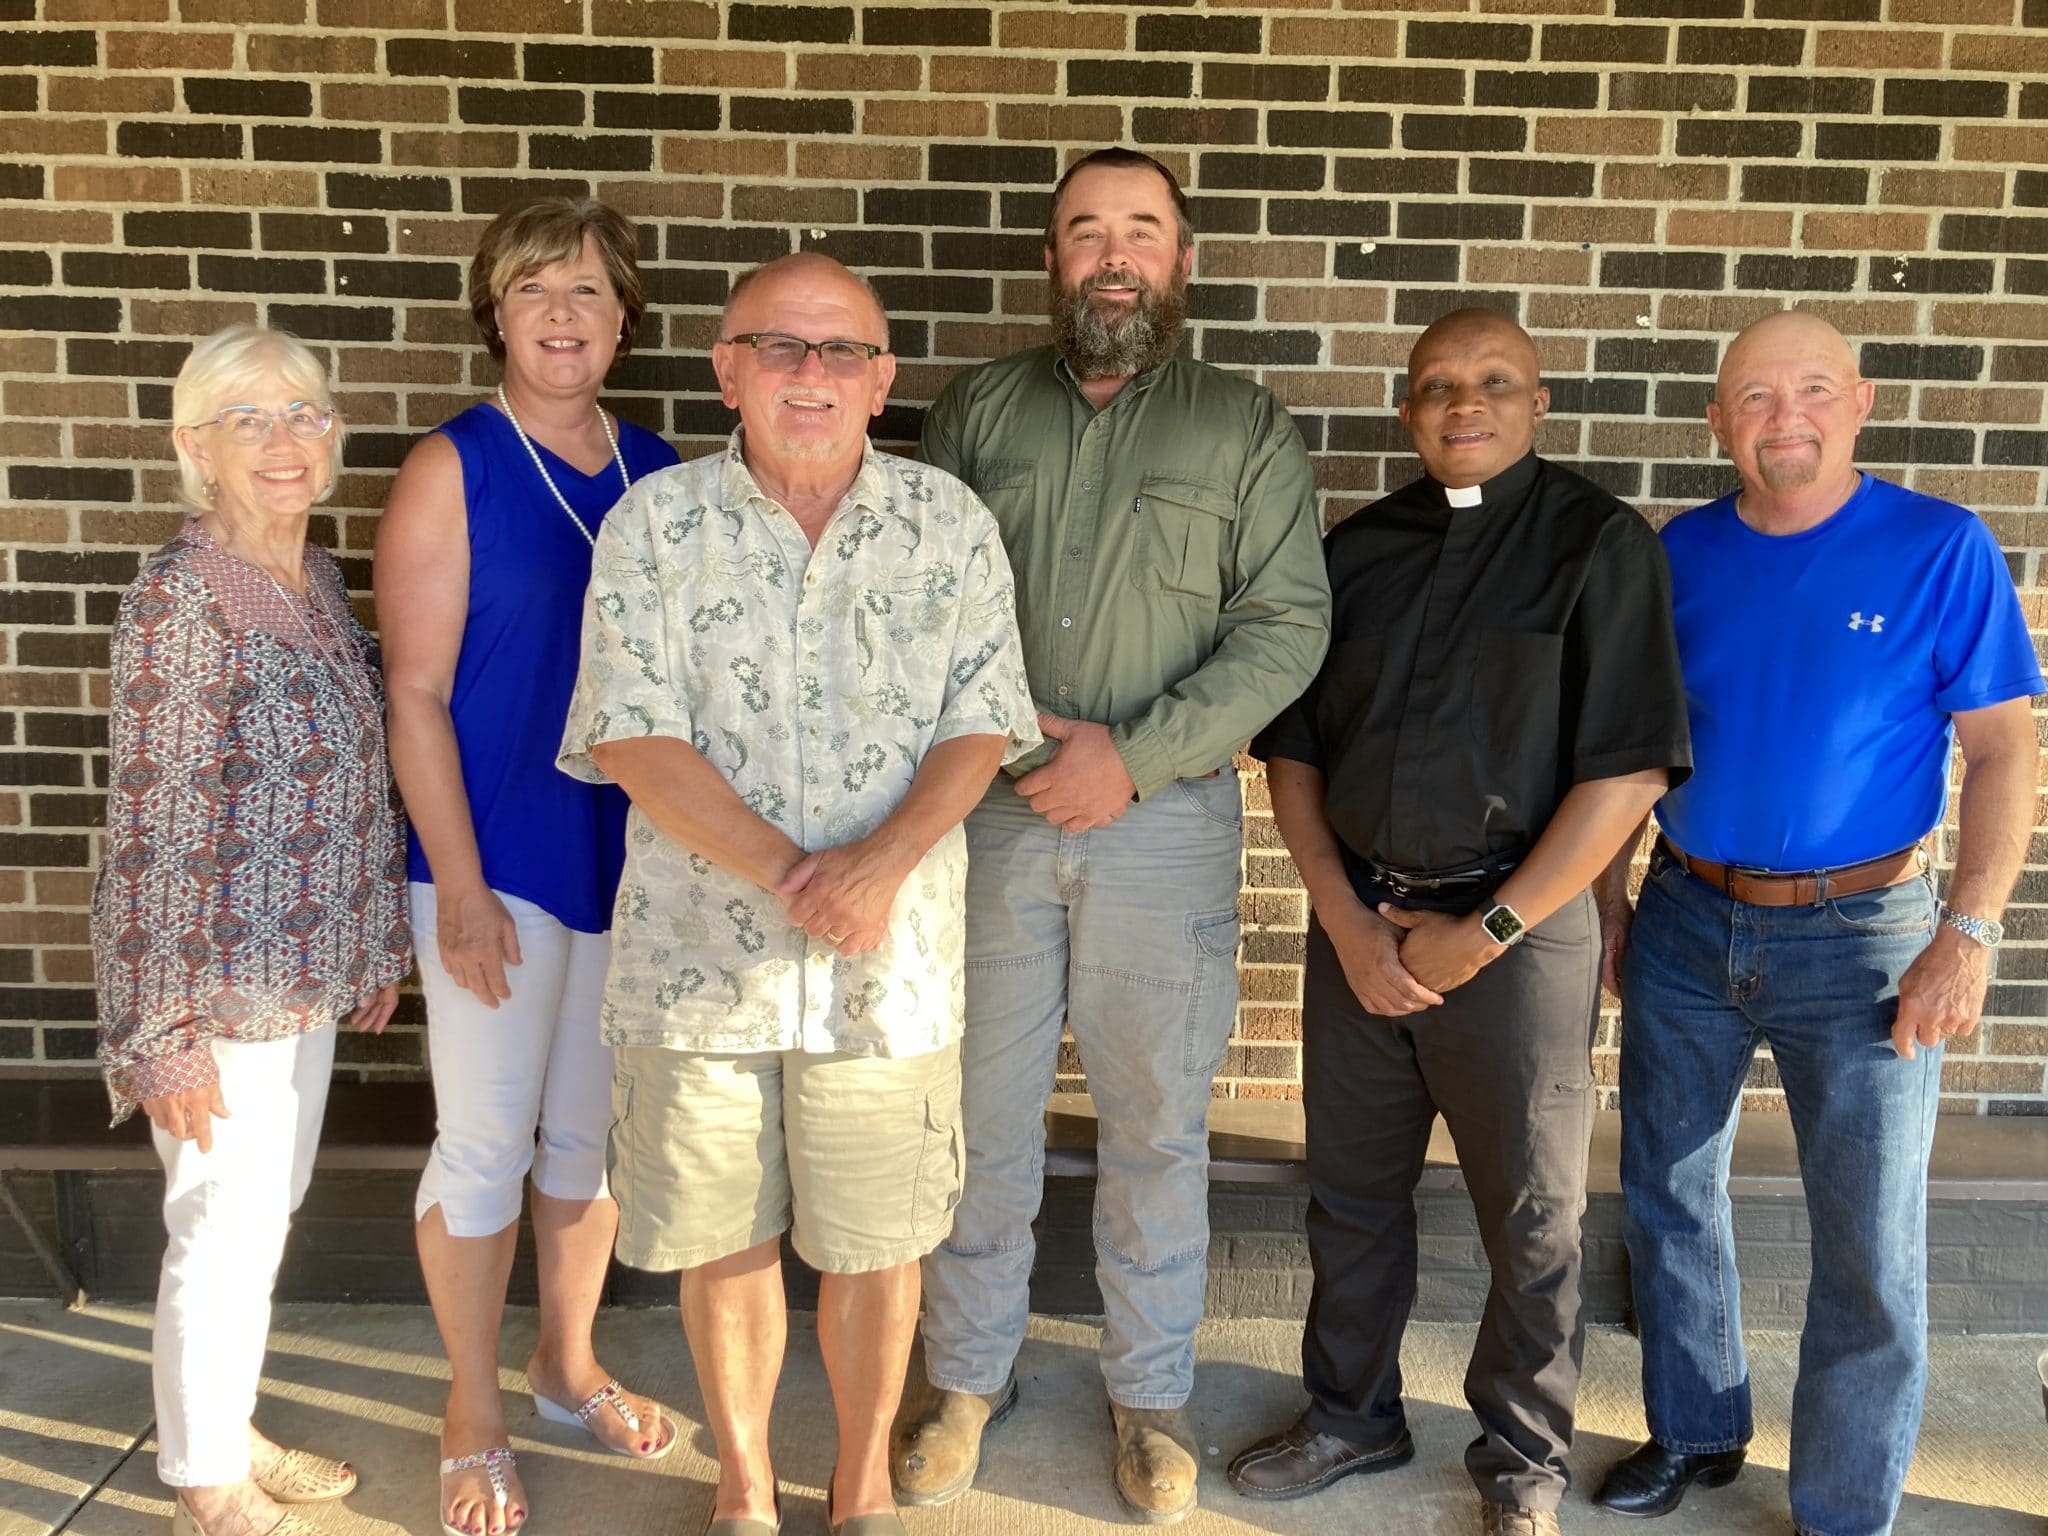 From left, Julie McDevitt; Cathy Kliethermes; Bill Allen, Vice-Chair; Tom Irwin, Chair; Father Cal; and, Deacon Chet Zuck. Not pictured, Jay Harms.